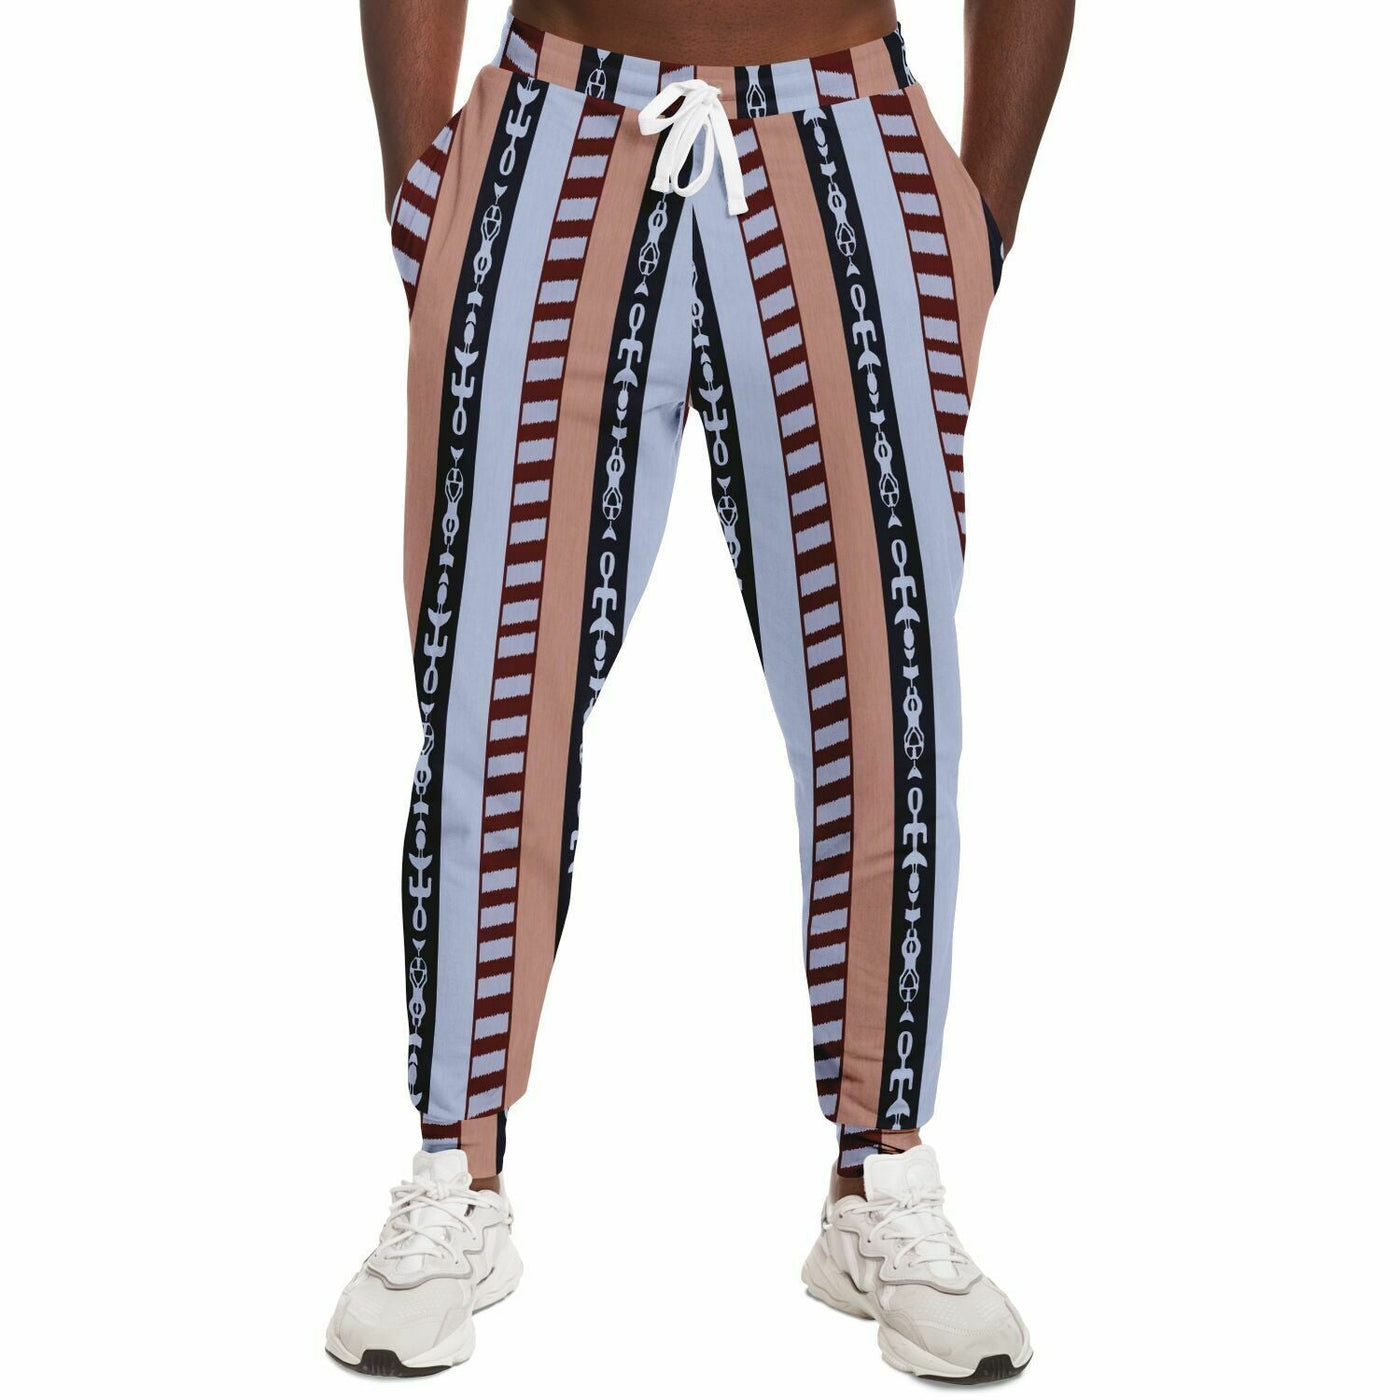 The Dude's Joggers with Iconic Lebowski Pajamas Pattern